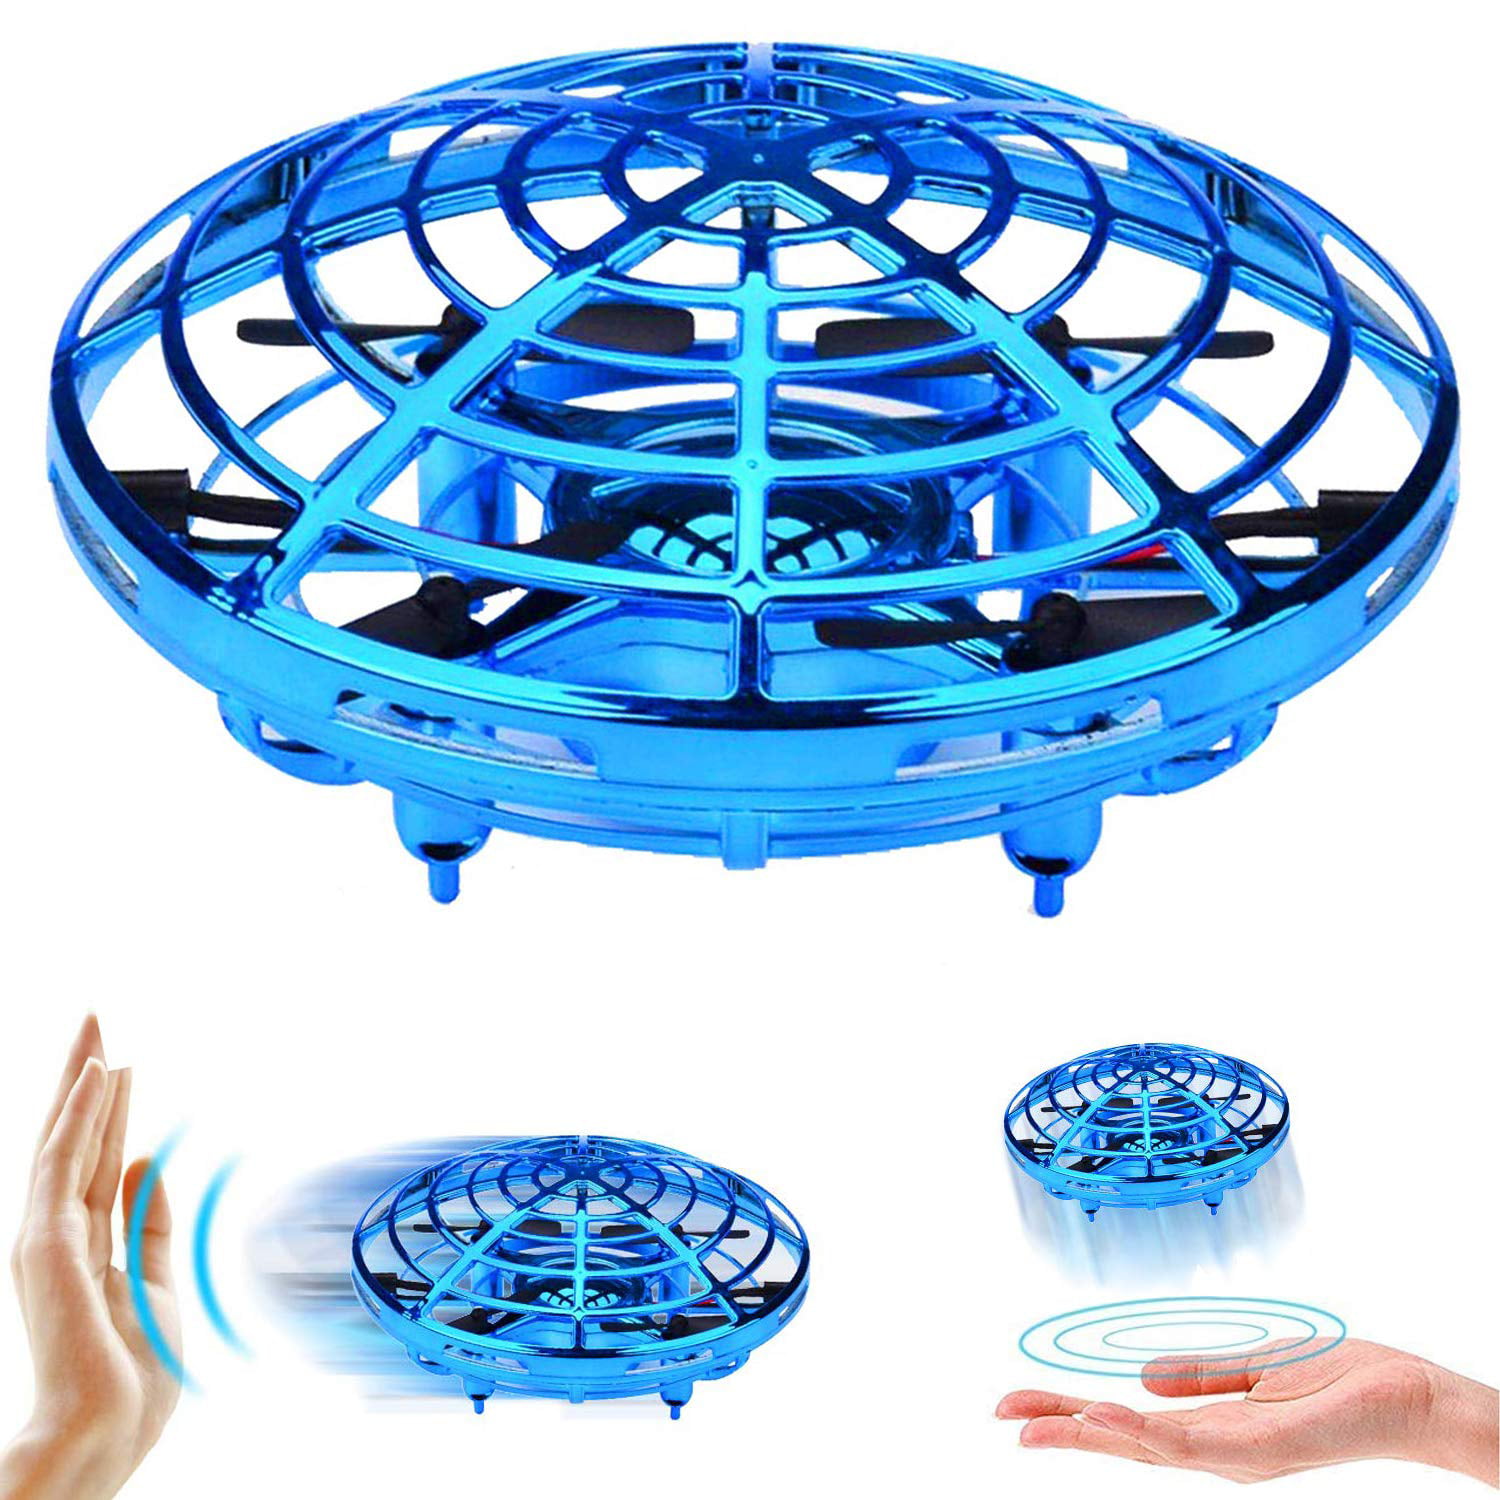 Mini 360° Rotating Hand Operated Drones Toy for Kids Flying UFO Hand Control New 